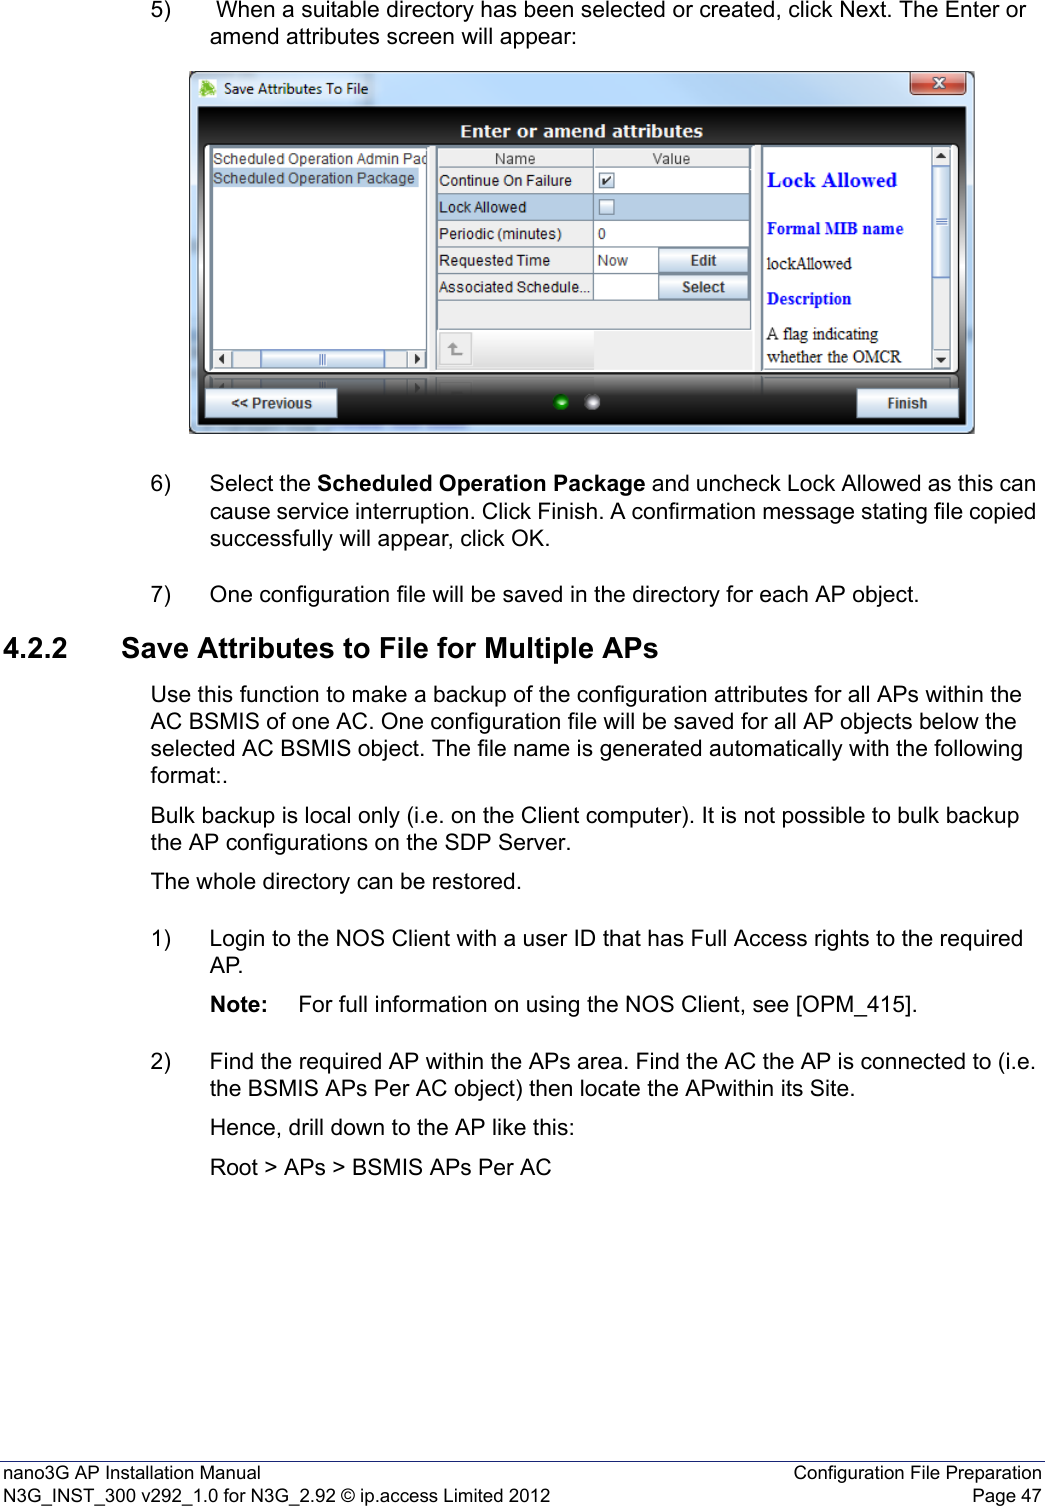 nano3G AP Installation Manual Configuration File PreparationN3G_INST_300 v292_1.0 for N3G_2.92 © ip.access Limited 2012 Page 475)  When a suitable directory has been selected or created, click Next. The Enter or amend attributes screen will appear:6) Select the Scheduled Operation Package and uncheck Lock Allowed as this can cause service interruption. Click Finish. A confirmation message stating file copied successfully will appear, click OK.7) One configuration file will be saved in the directory for each AP object.4.2.2 Save Attributes to File for Multiple APsUse this function to make a backup of the configuration attributes for all APs within the AC BSMIS of one AC. One configuration file will be saved for all AP objects below the selected AC BSMIS object. The file name is generated automatically with the following format:.Bulk backup is local only (i.e. on the Client computer). It is not possible to bulk backup the AP configurations on the SDP Server.The whole directory can be restored.1) Login to the NOS Client with a user ID that has Full Access rights to the required AP.Note: For full information on using the NOS Client, see [OPM_415].2) Find the required AP within the APs area. Find the AC the AP is connected to (i.e. the BSMIS APs Per AC object) then locate the APwithin its Site. Hence, drill down to the AP like this:Root &gt; APs &gt; BSMIS APs Per AC